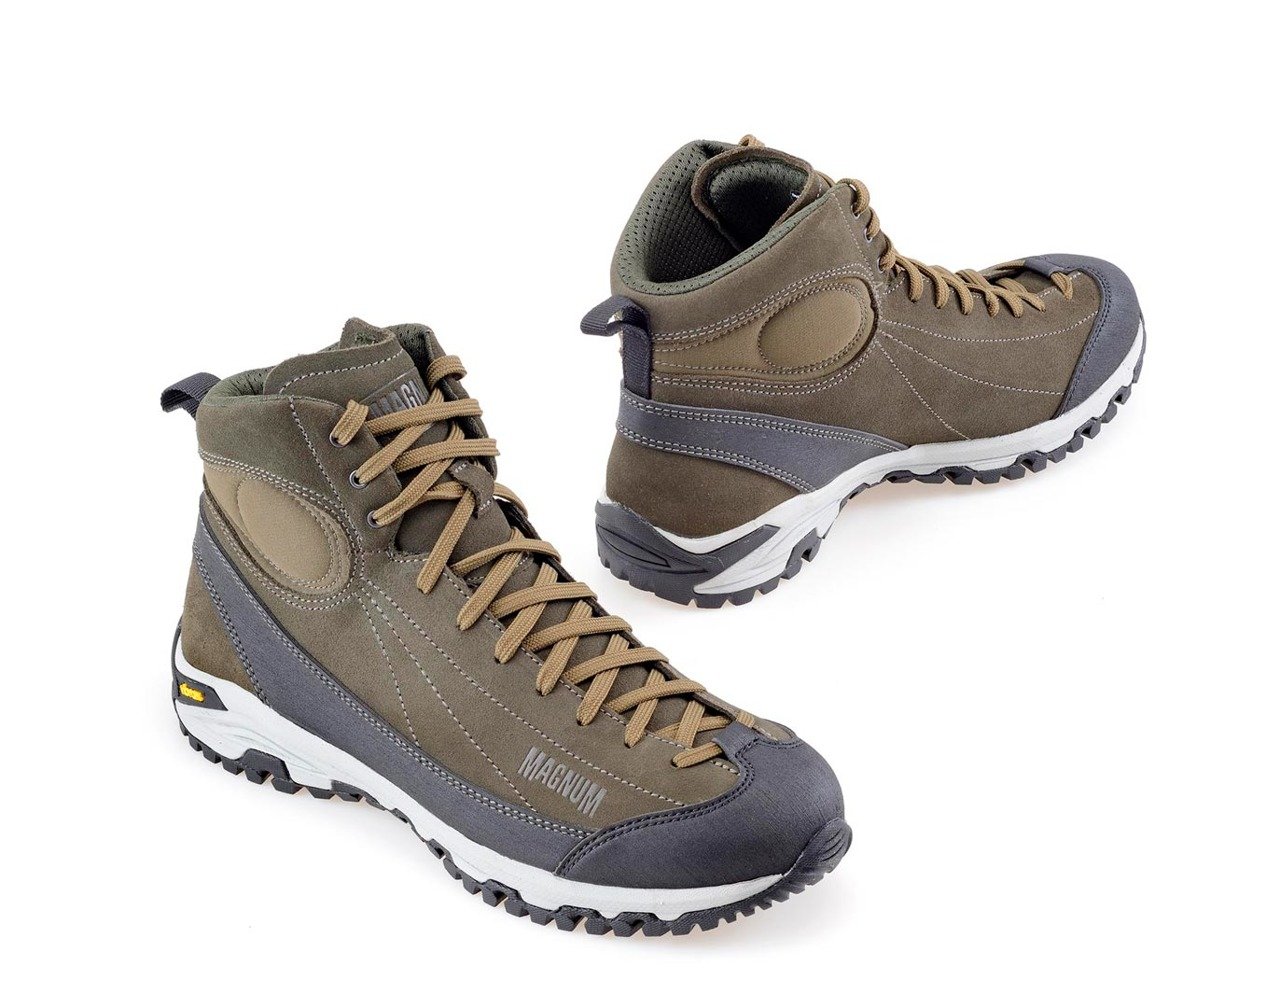 BOOTS DEFCON 5 APPROACH TACTICAL 5 MID 